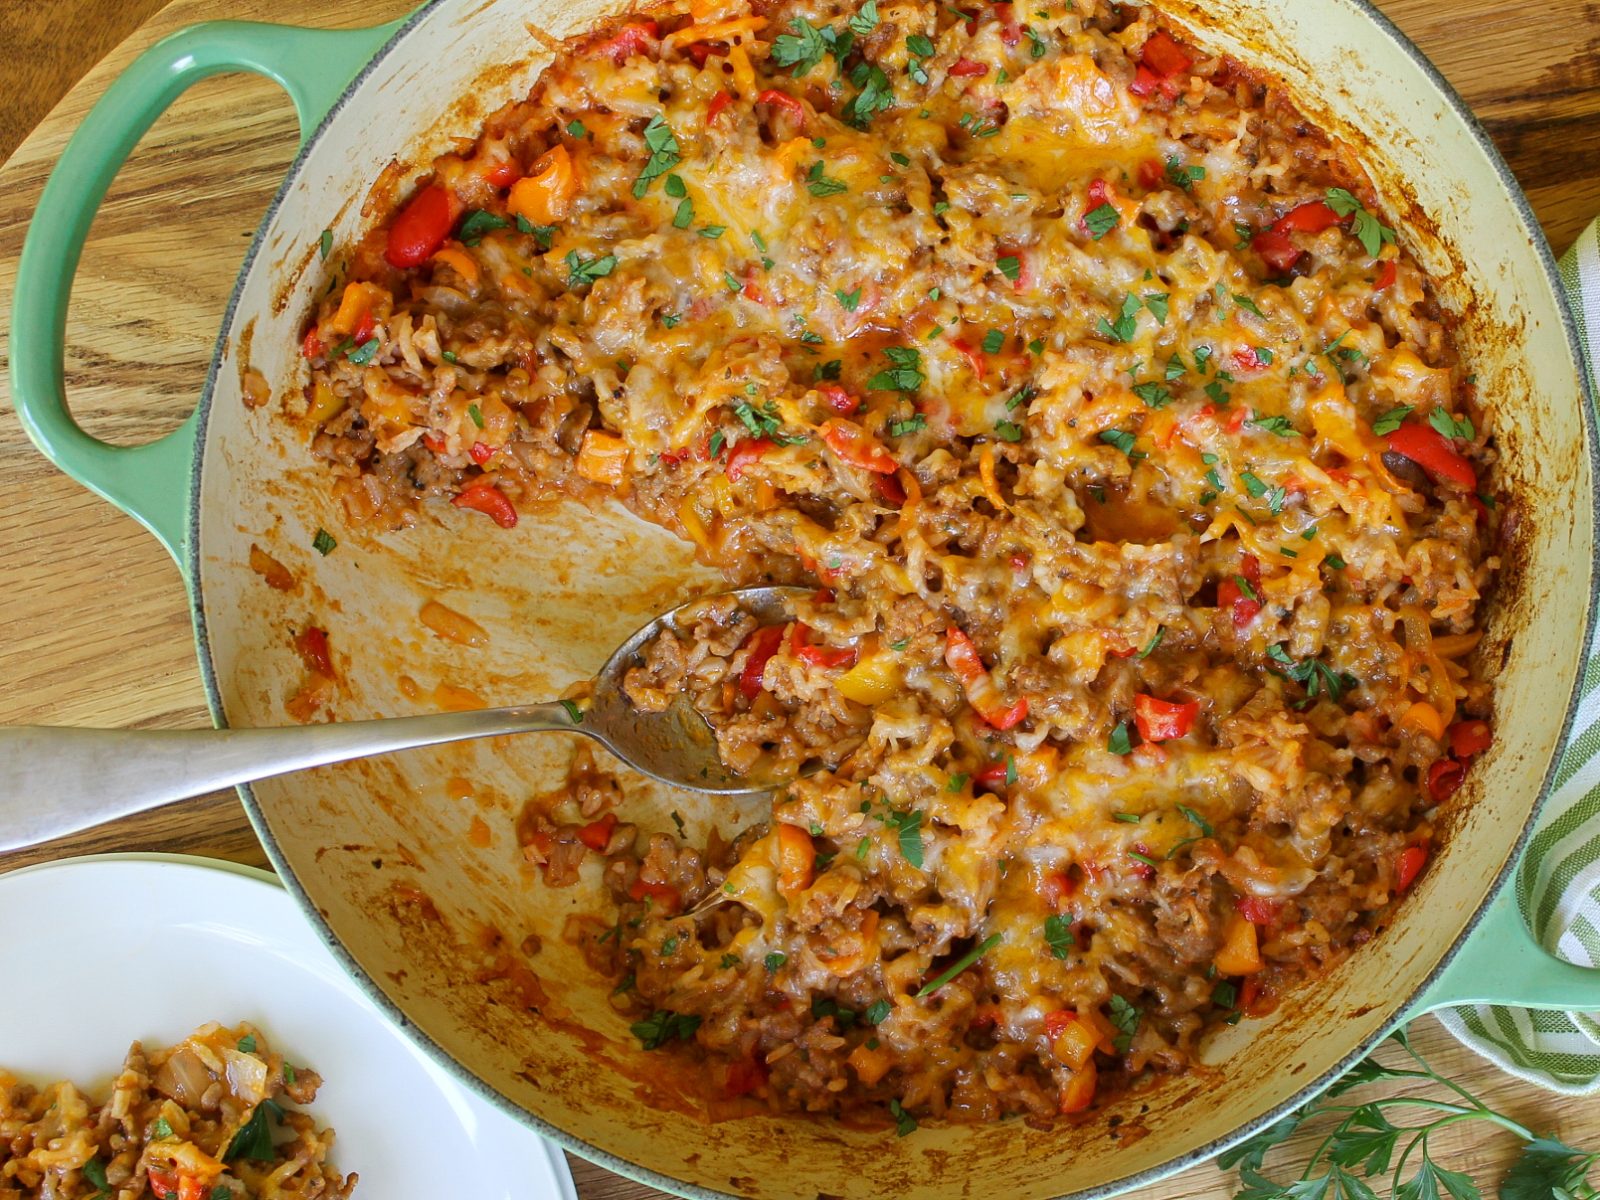 Stuffed Pepper Casserole – Super Meal To Go With The Sales At Publix